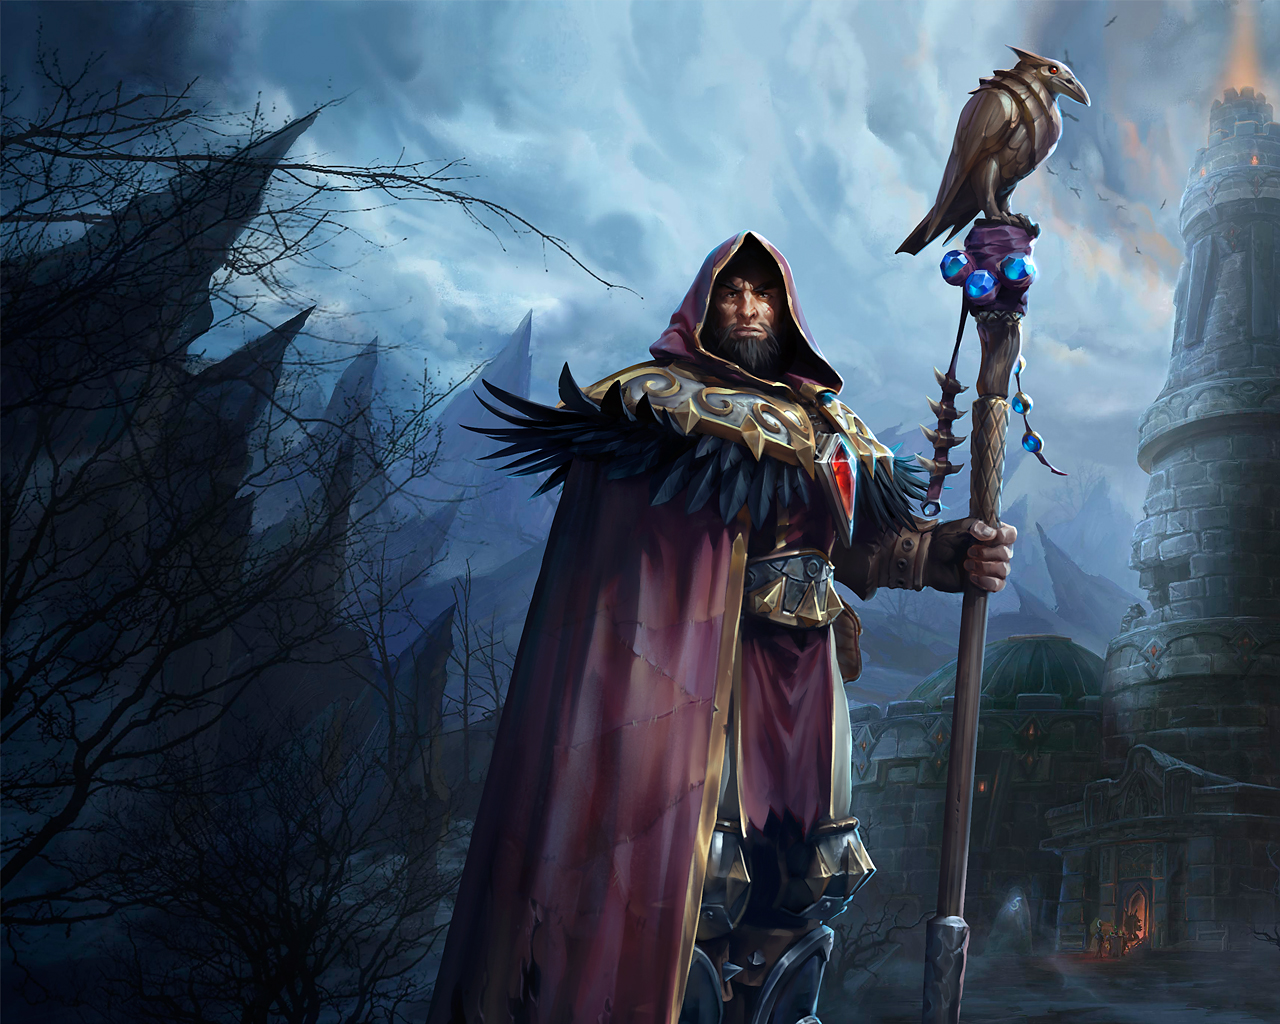 heroes of the storm wallpaper 1920x1080,action adventure game,cg artwork,pc game,mythology,adventure game